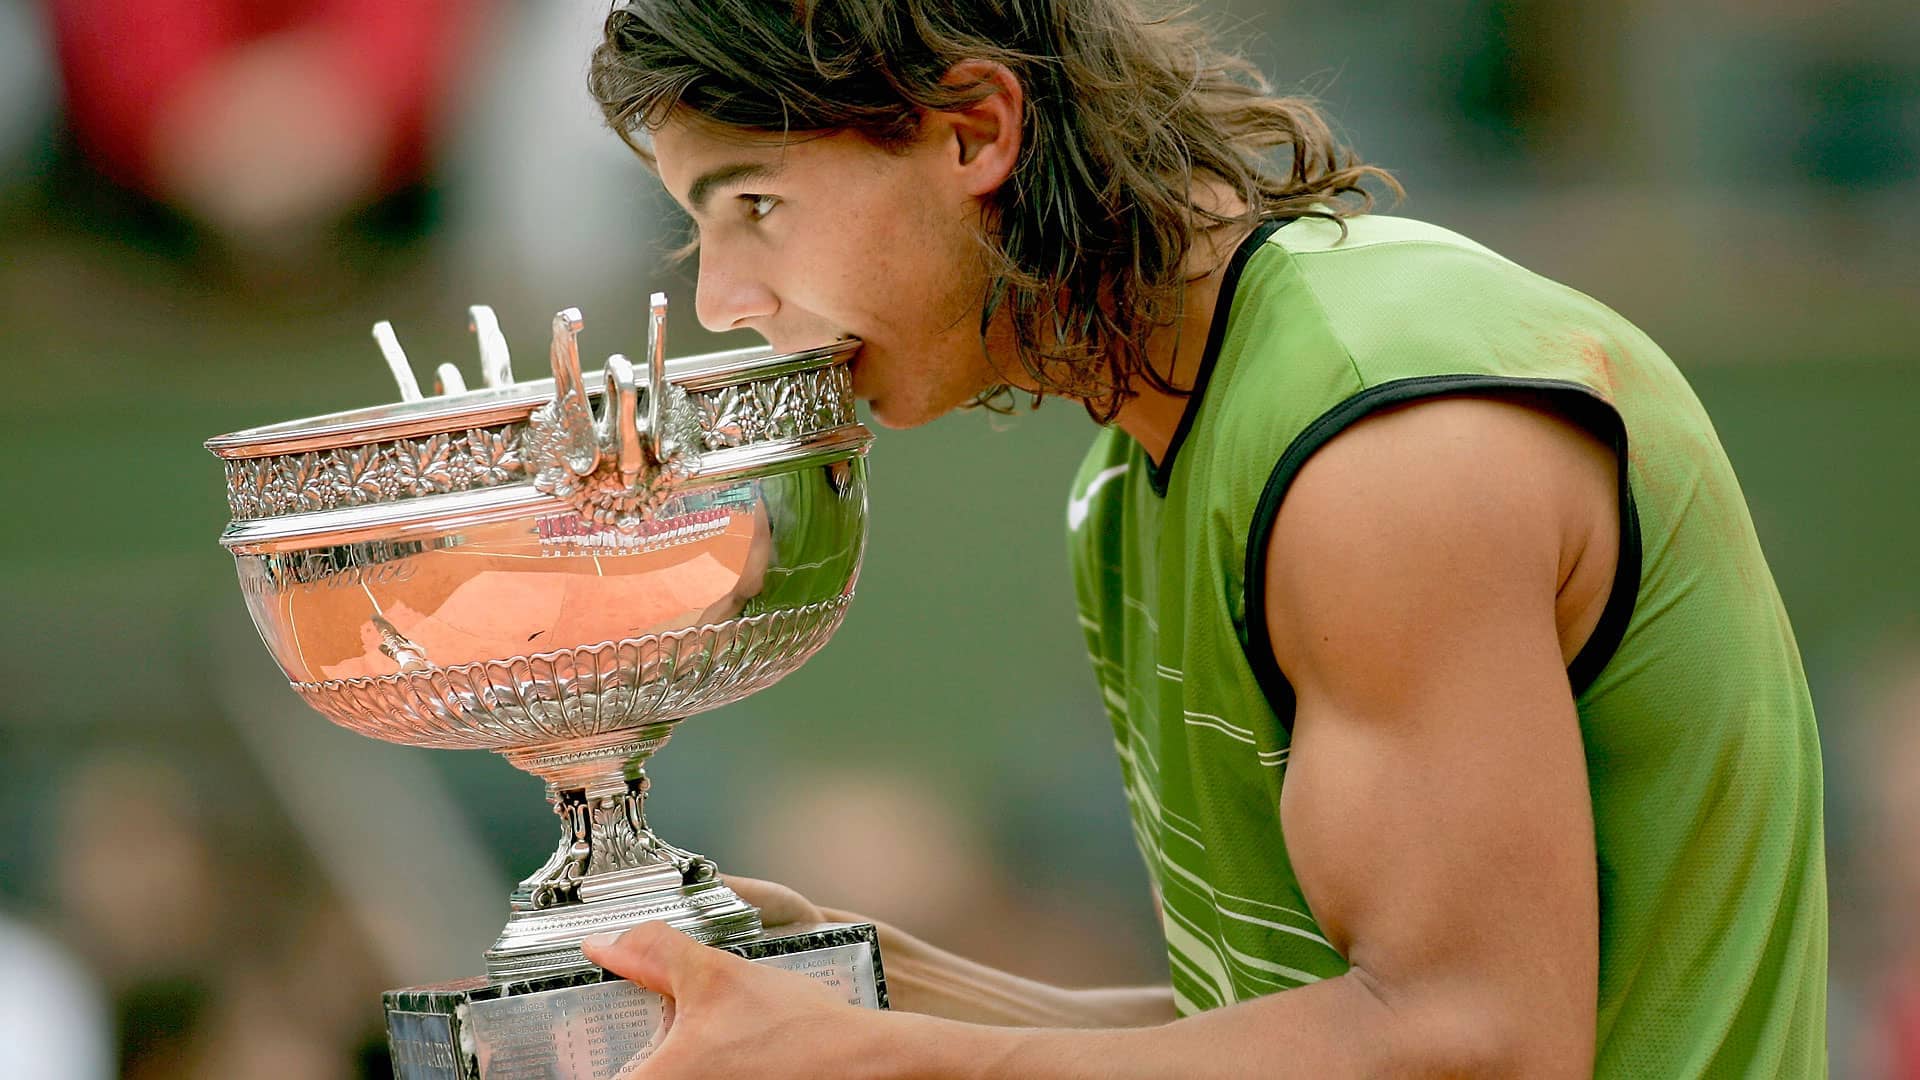 Rafael Nadal beat Mariano Puerta in four sets to capture his maiden Roland Garros title in 2005.